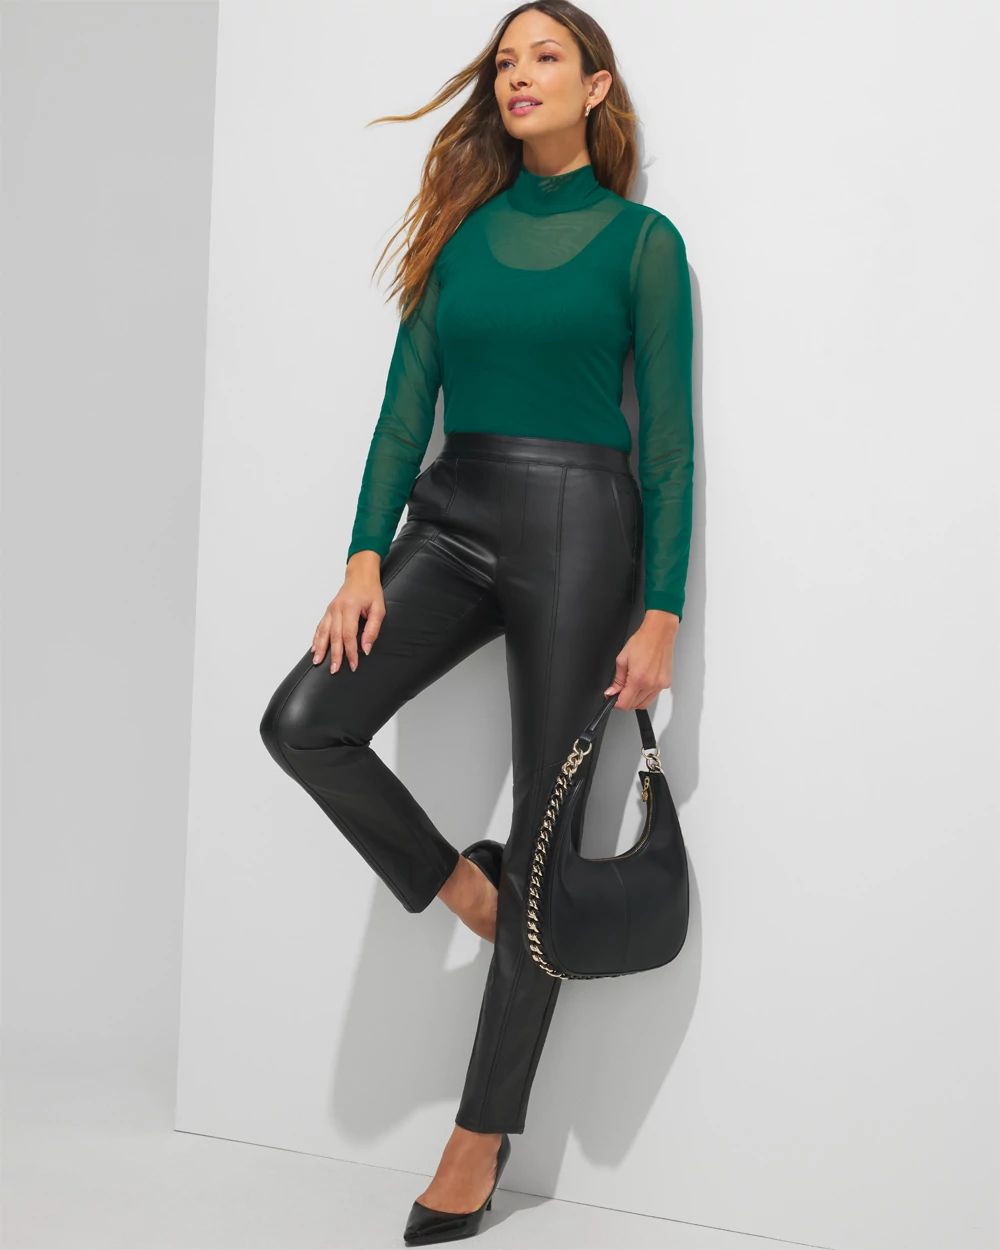 Outlet WHBM High Rise Pull-On Coated Slim Jeans click to view larger image.